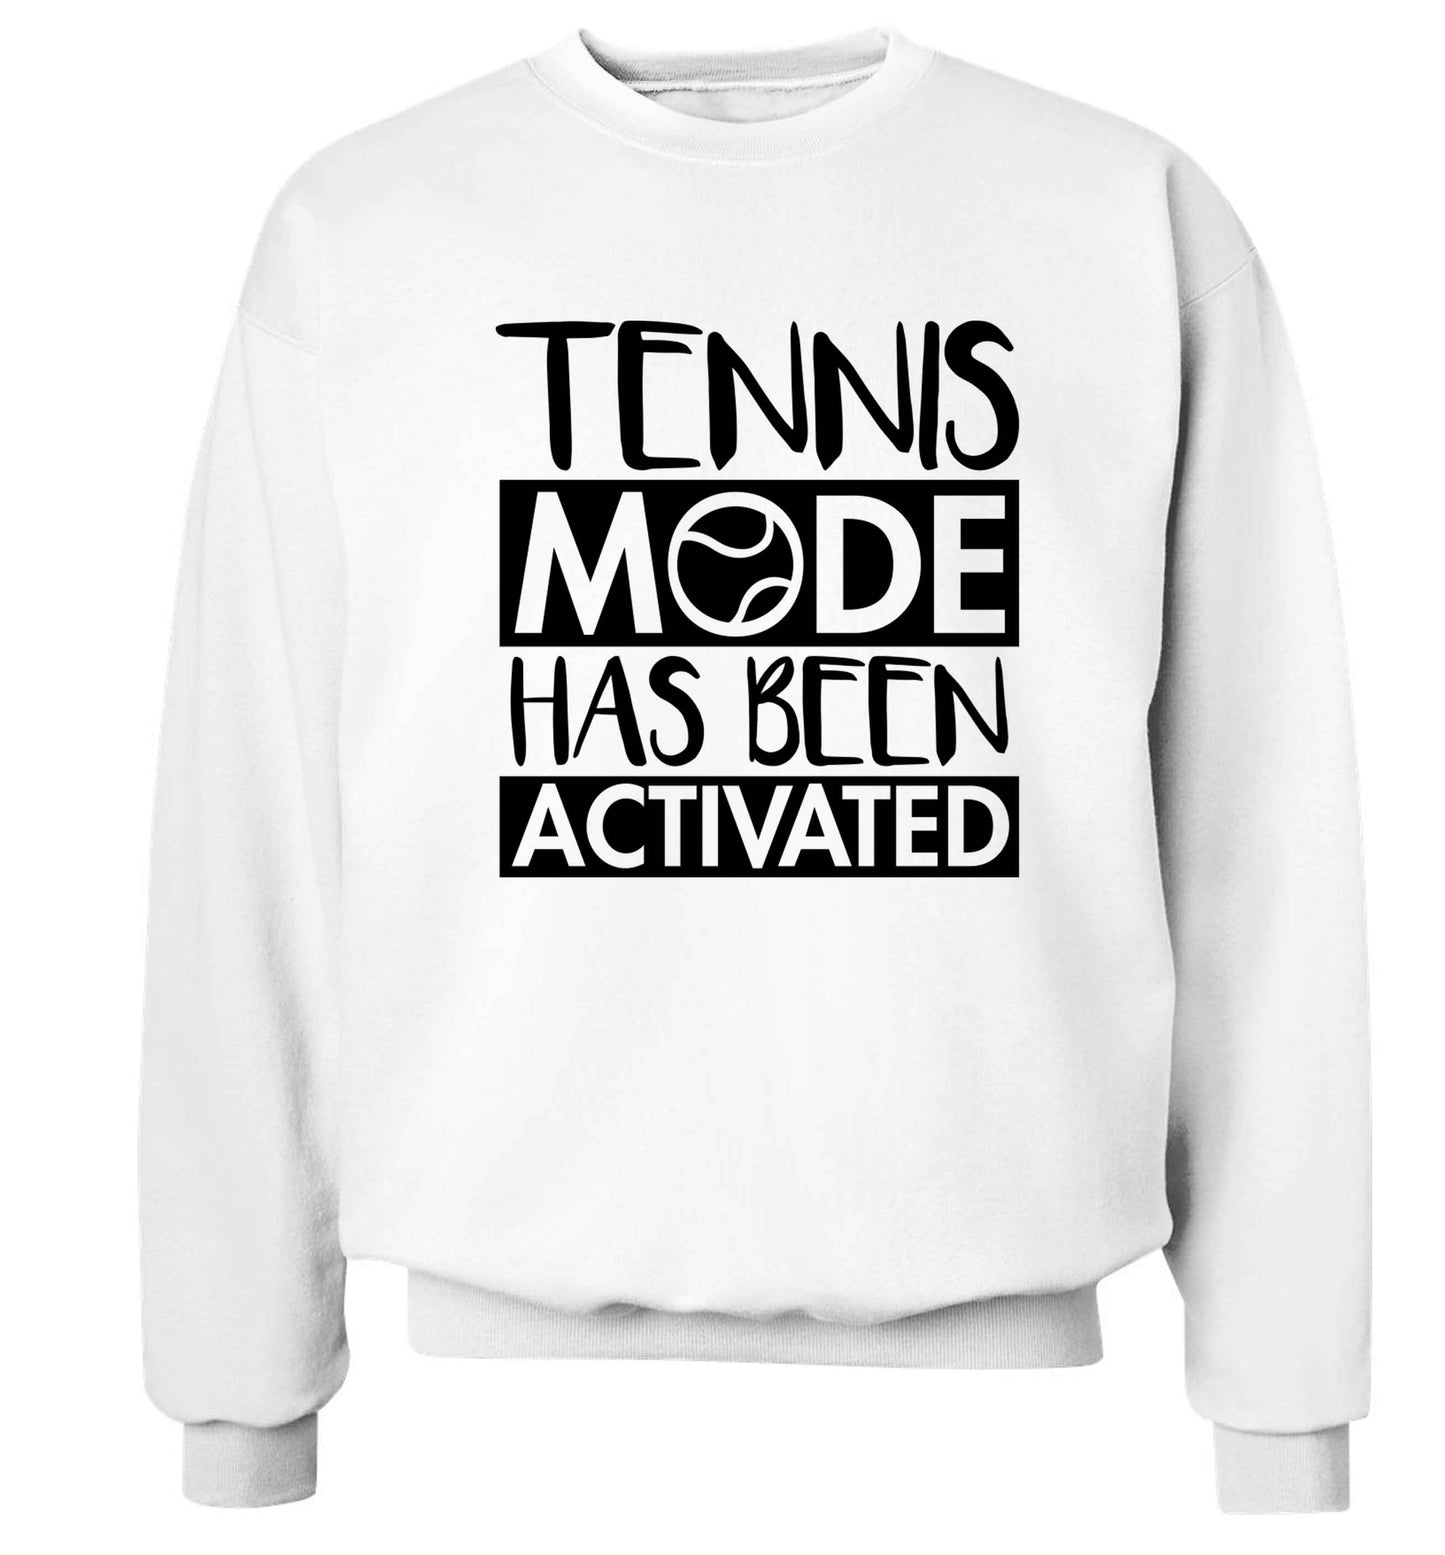 Tennis mode has been activated Adult's unisex white Sweater 2XL